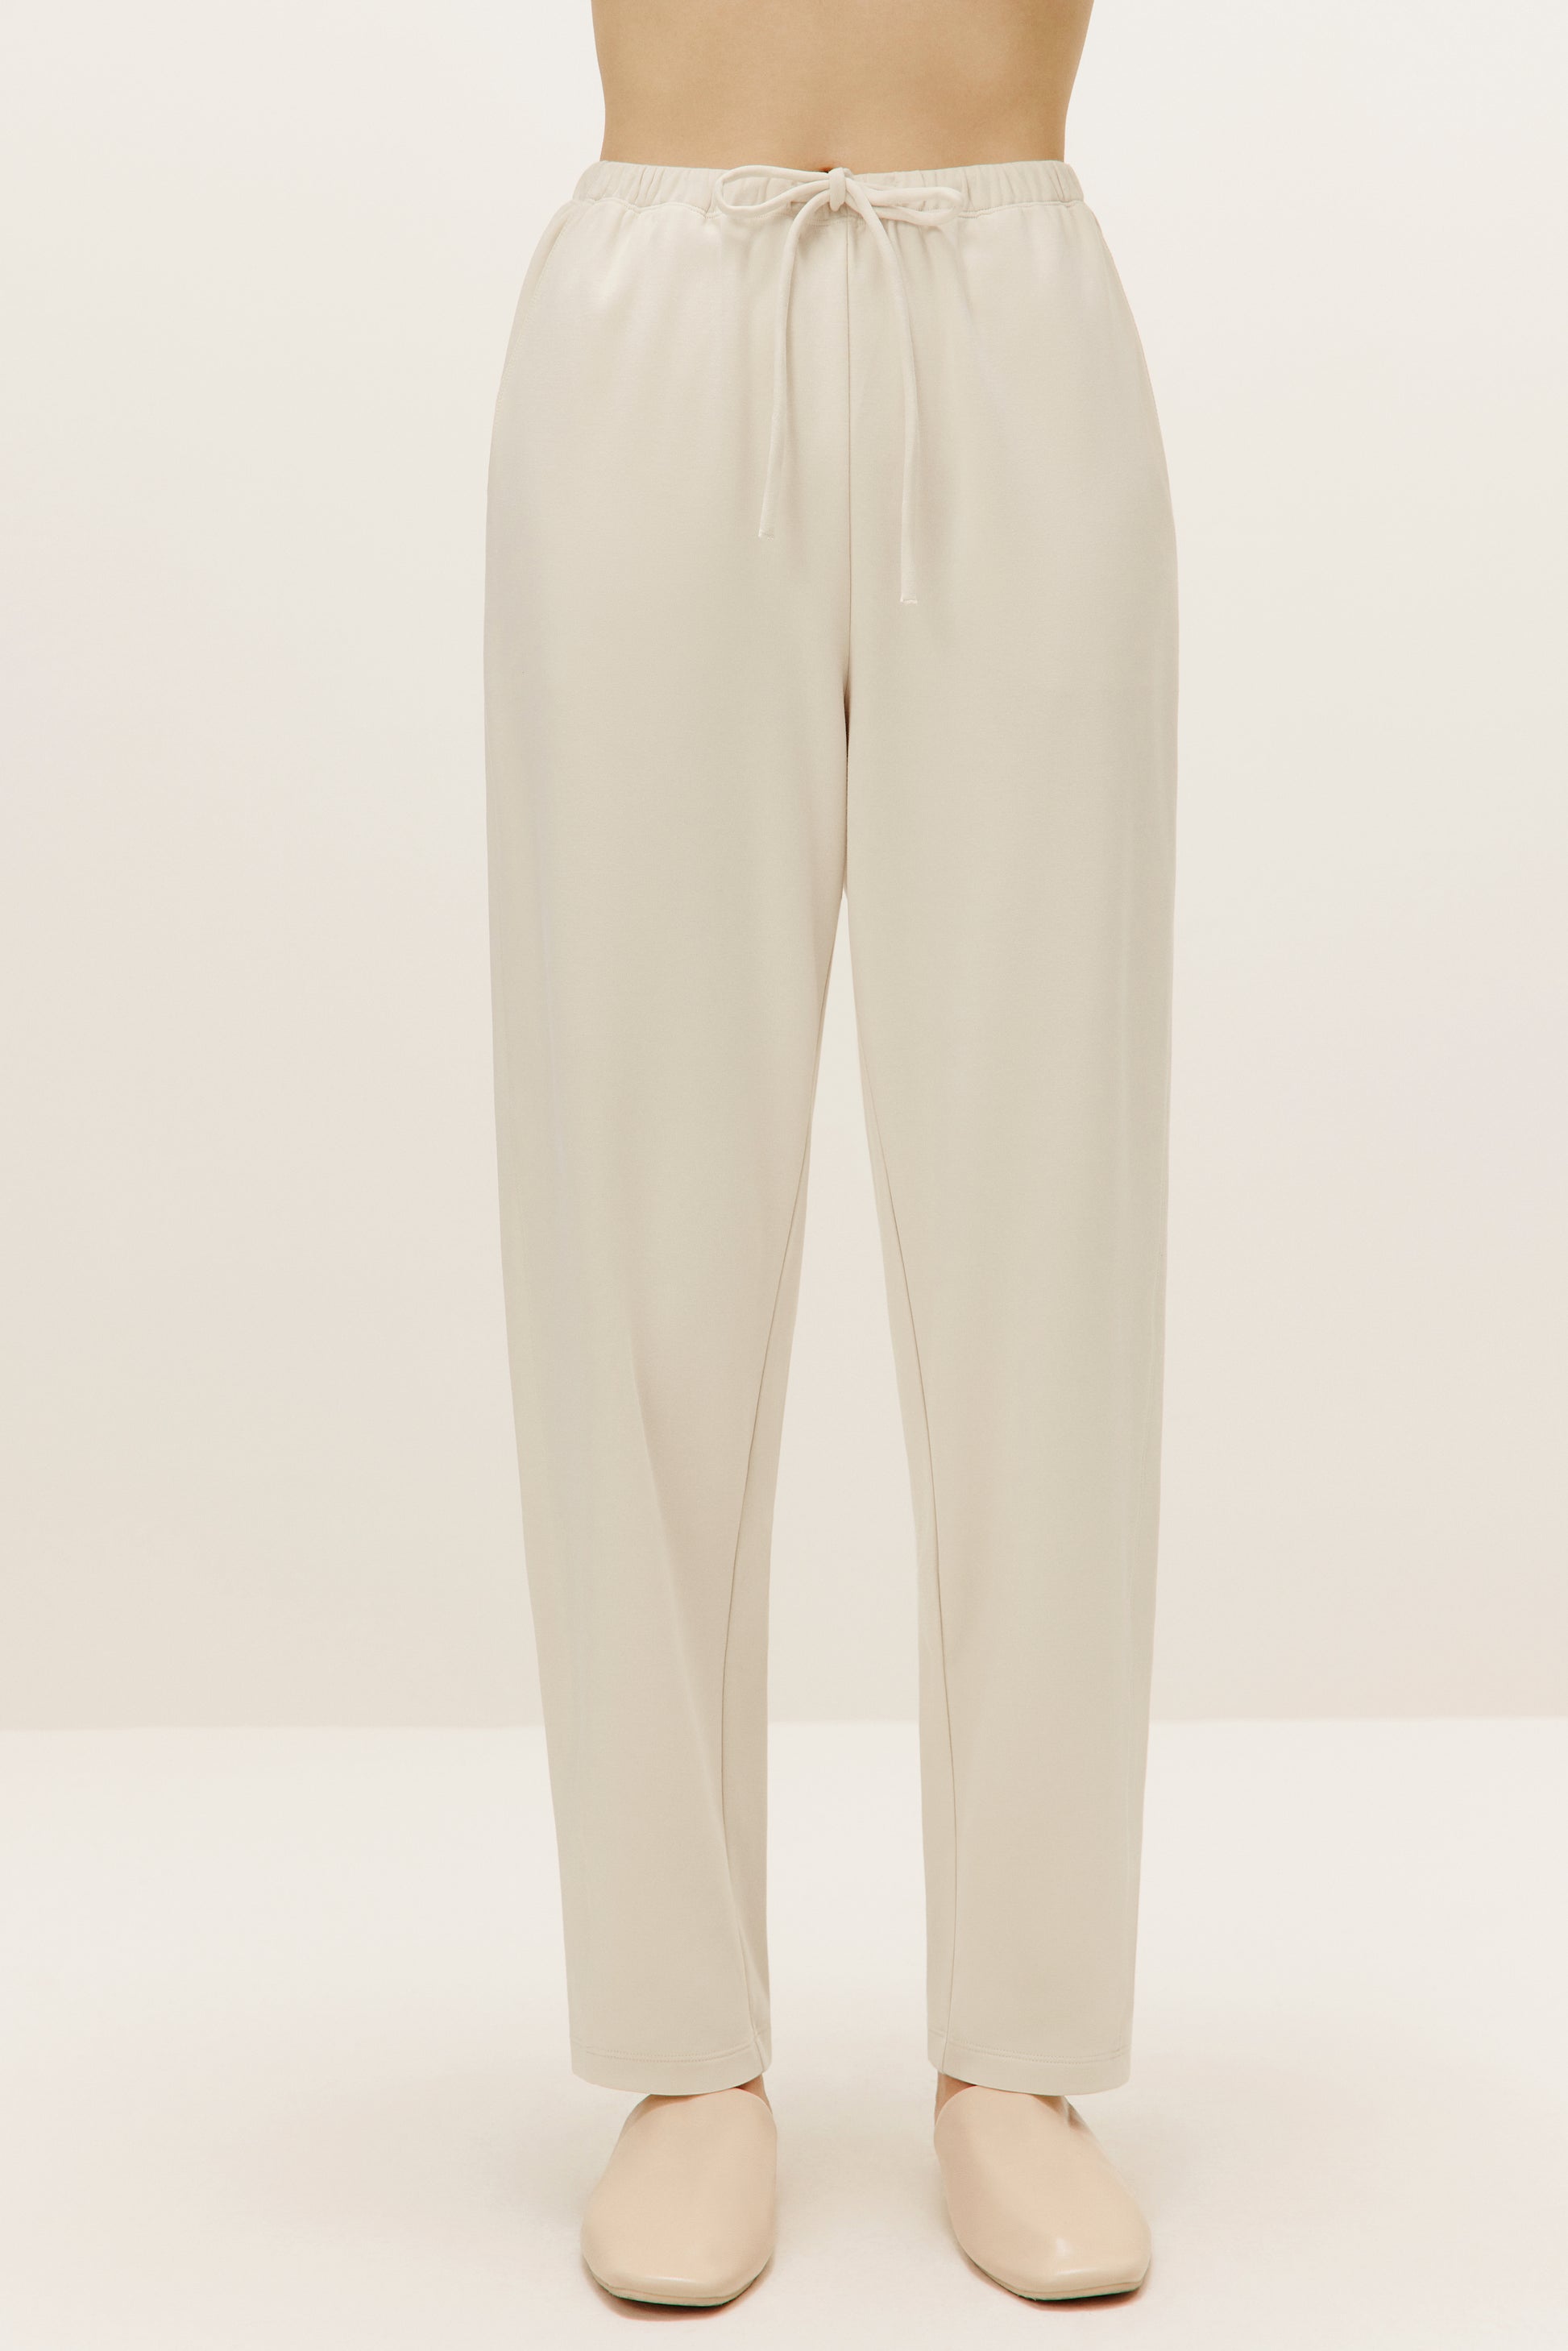 a pair of cream color pants with drawstring waist